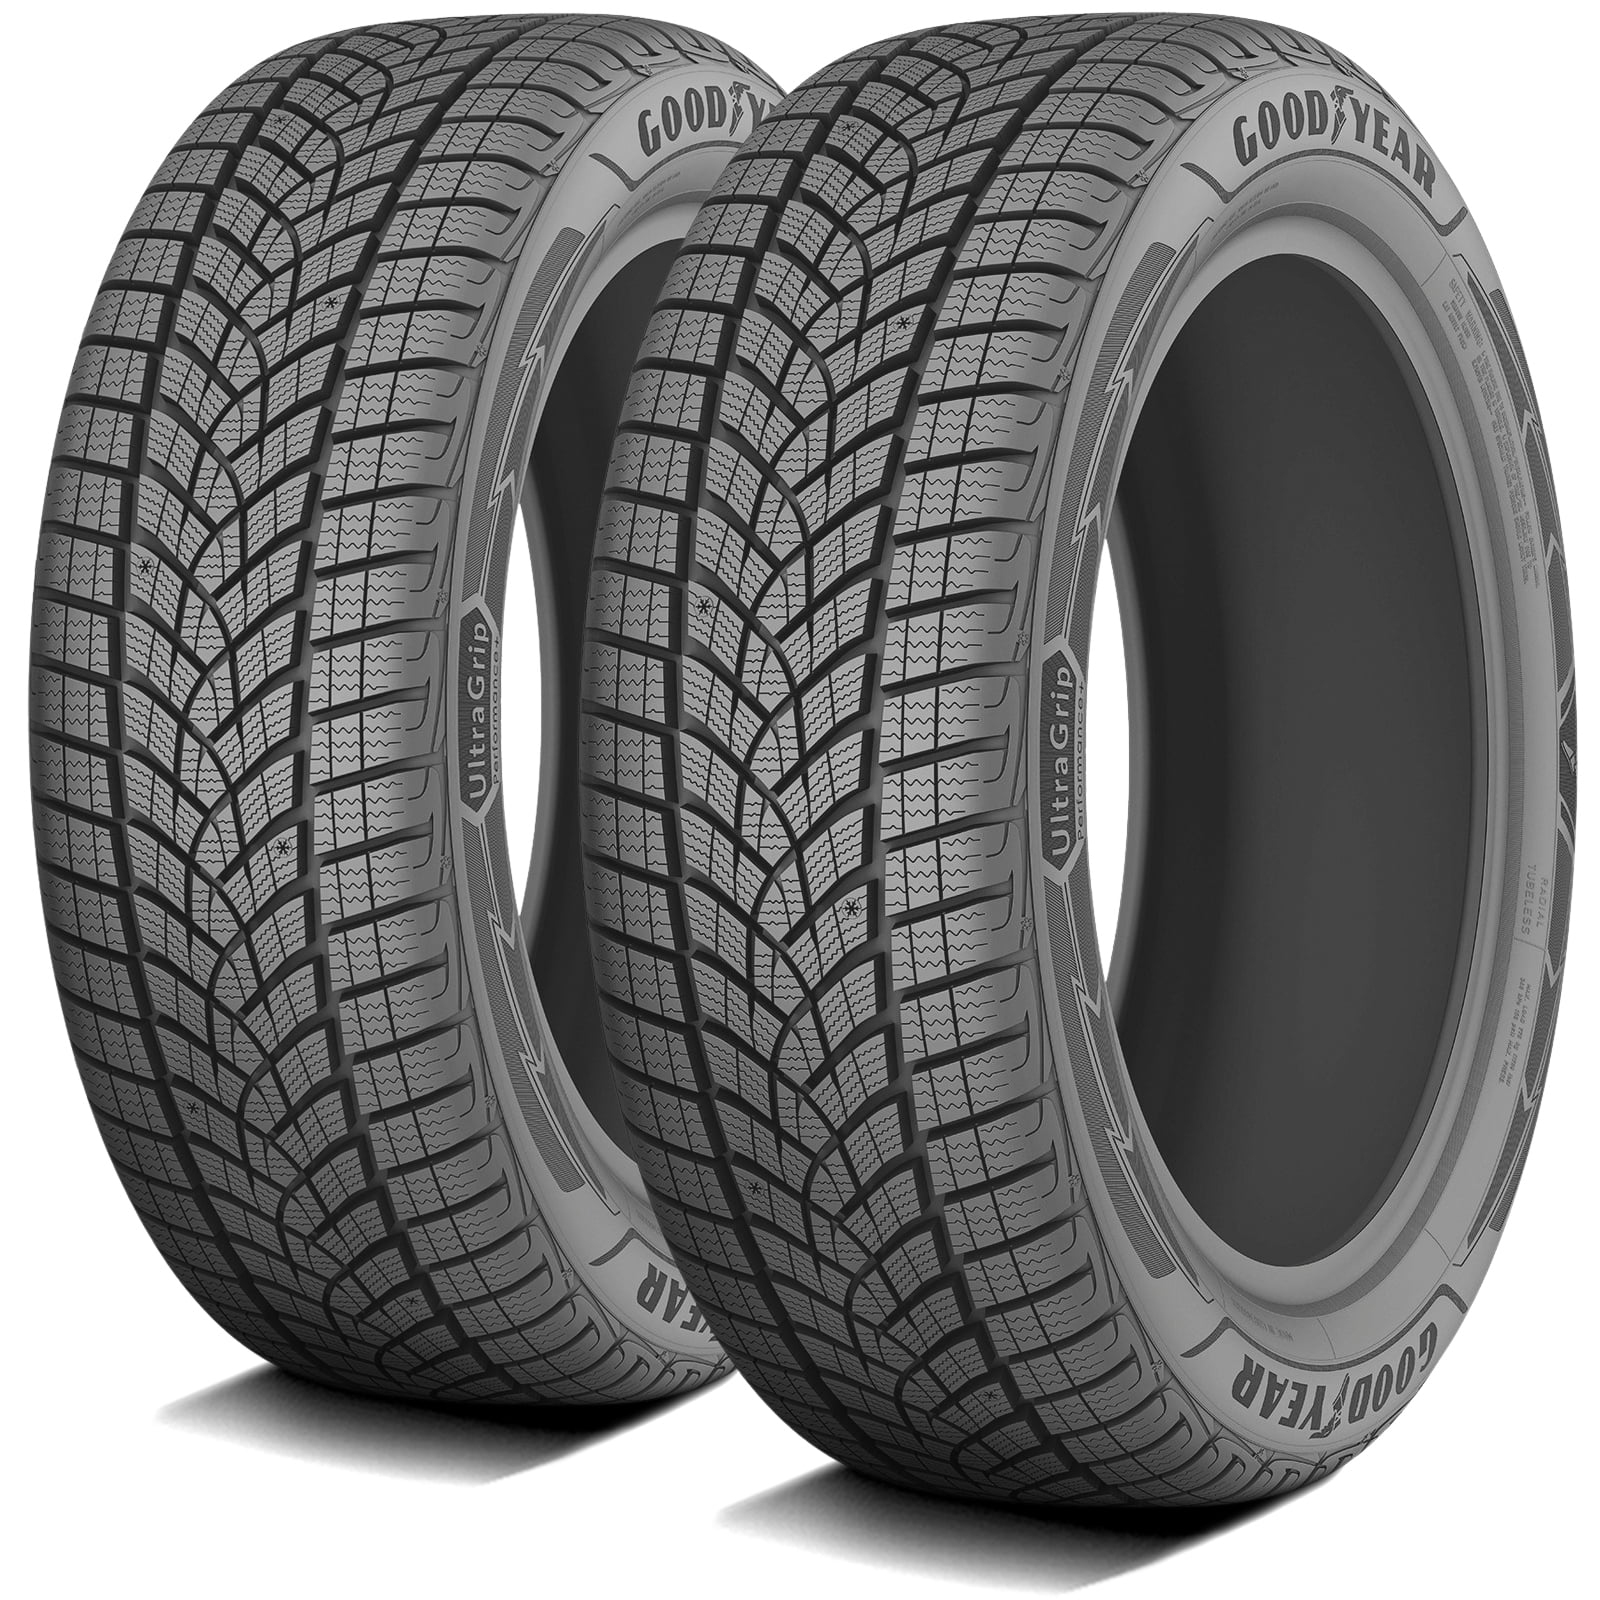 One Tire Goodyear Ultra Grip 2020 225/55R19 Ford 2013-16 + Mazda Touring, Titanium Plug-In Performance Winter CX-5 Escape 99V Grand Studless Fits: Hybrid SUV